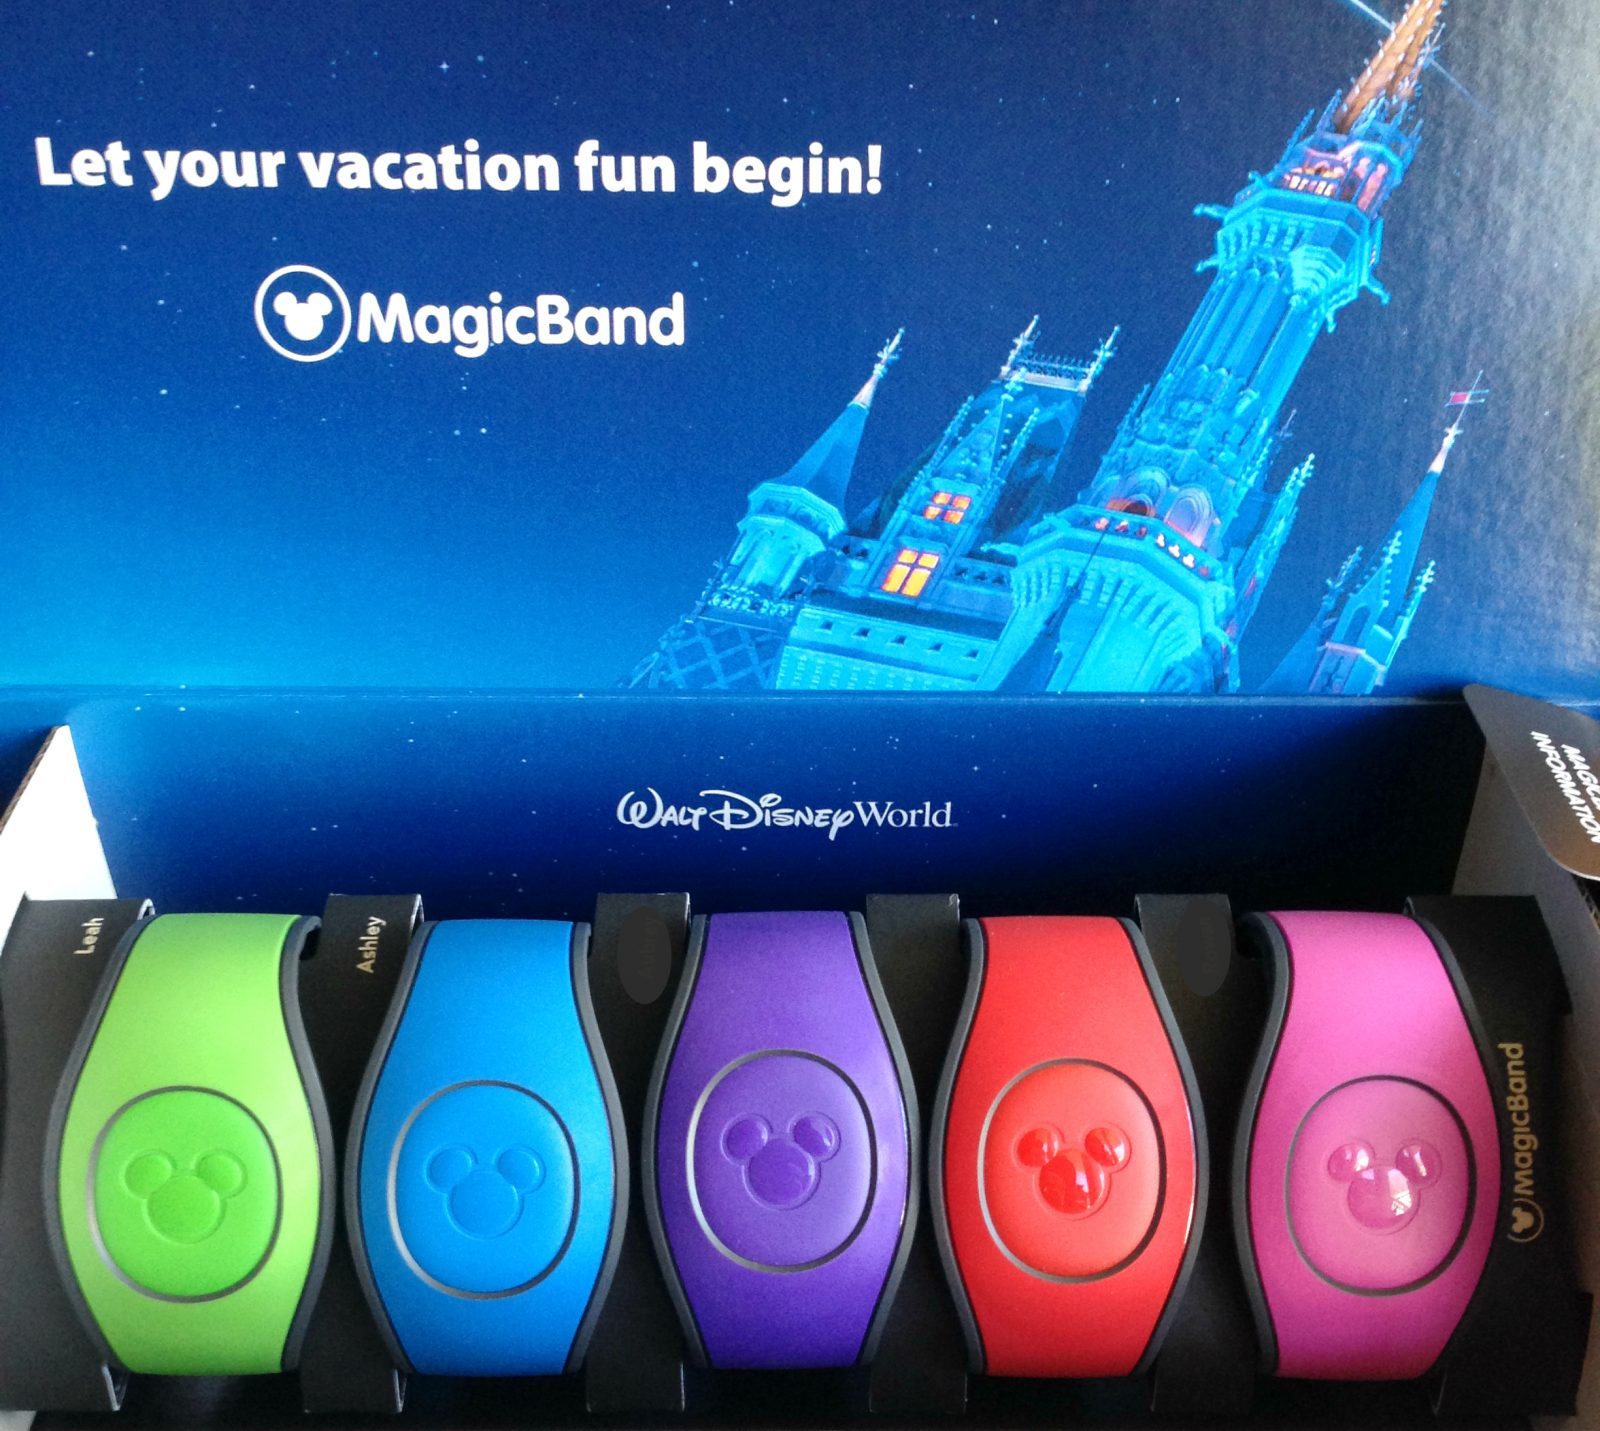 MagicBand & MagicBand+ at Disney World - What You Need to Know